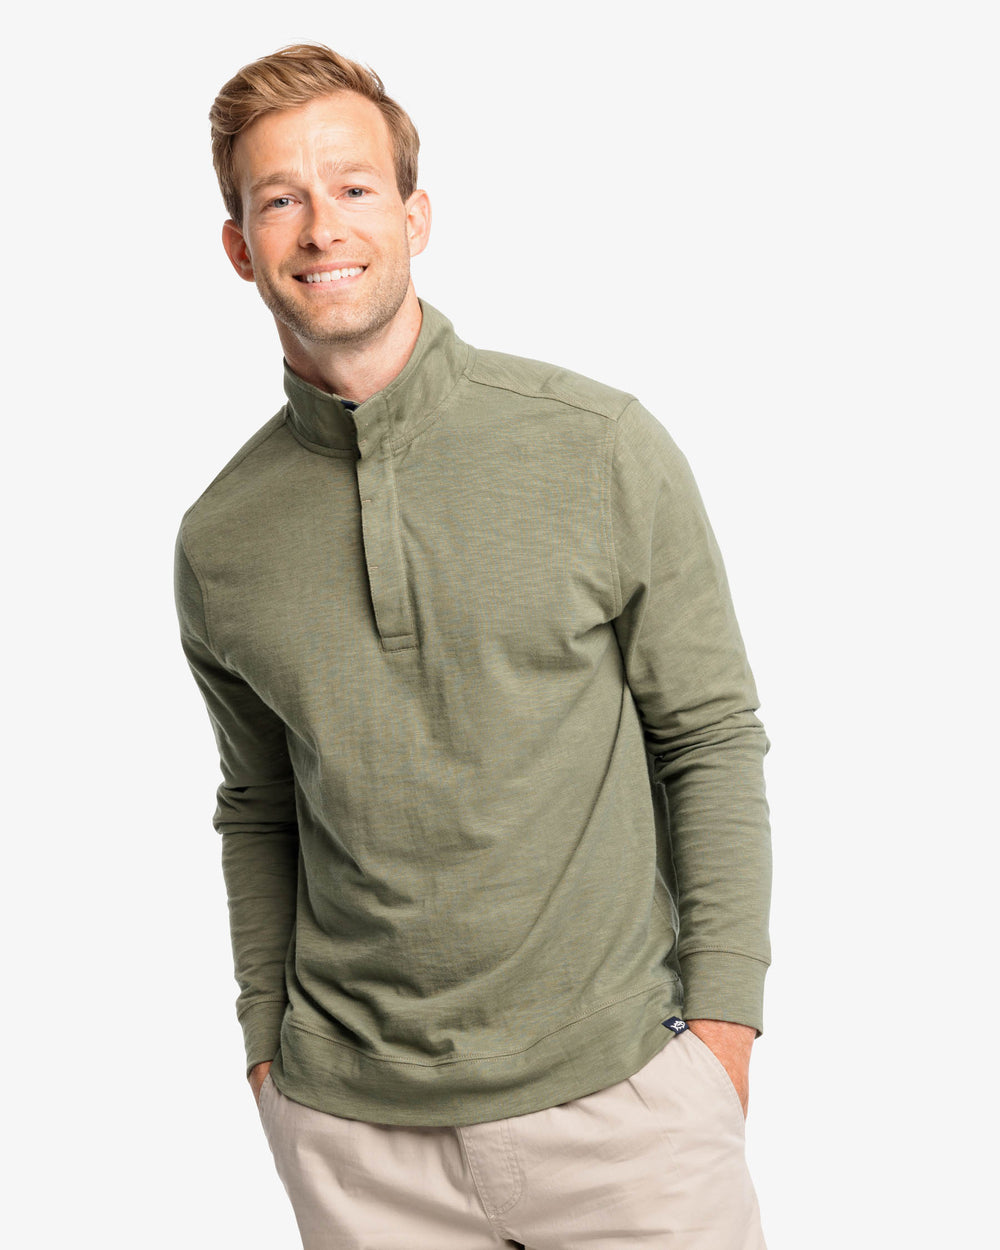 The front view of the Sun Farer Ocean View Quarter Button Pullover by Southern Tide - Pine